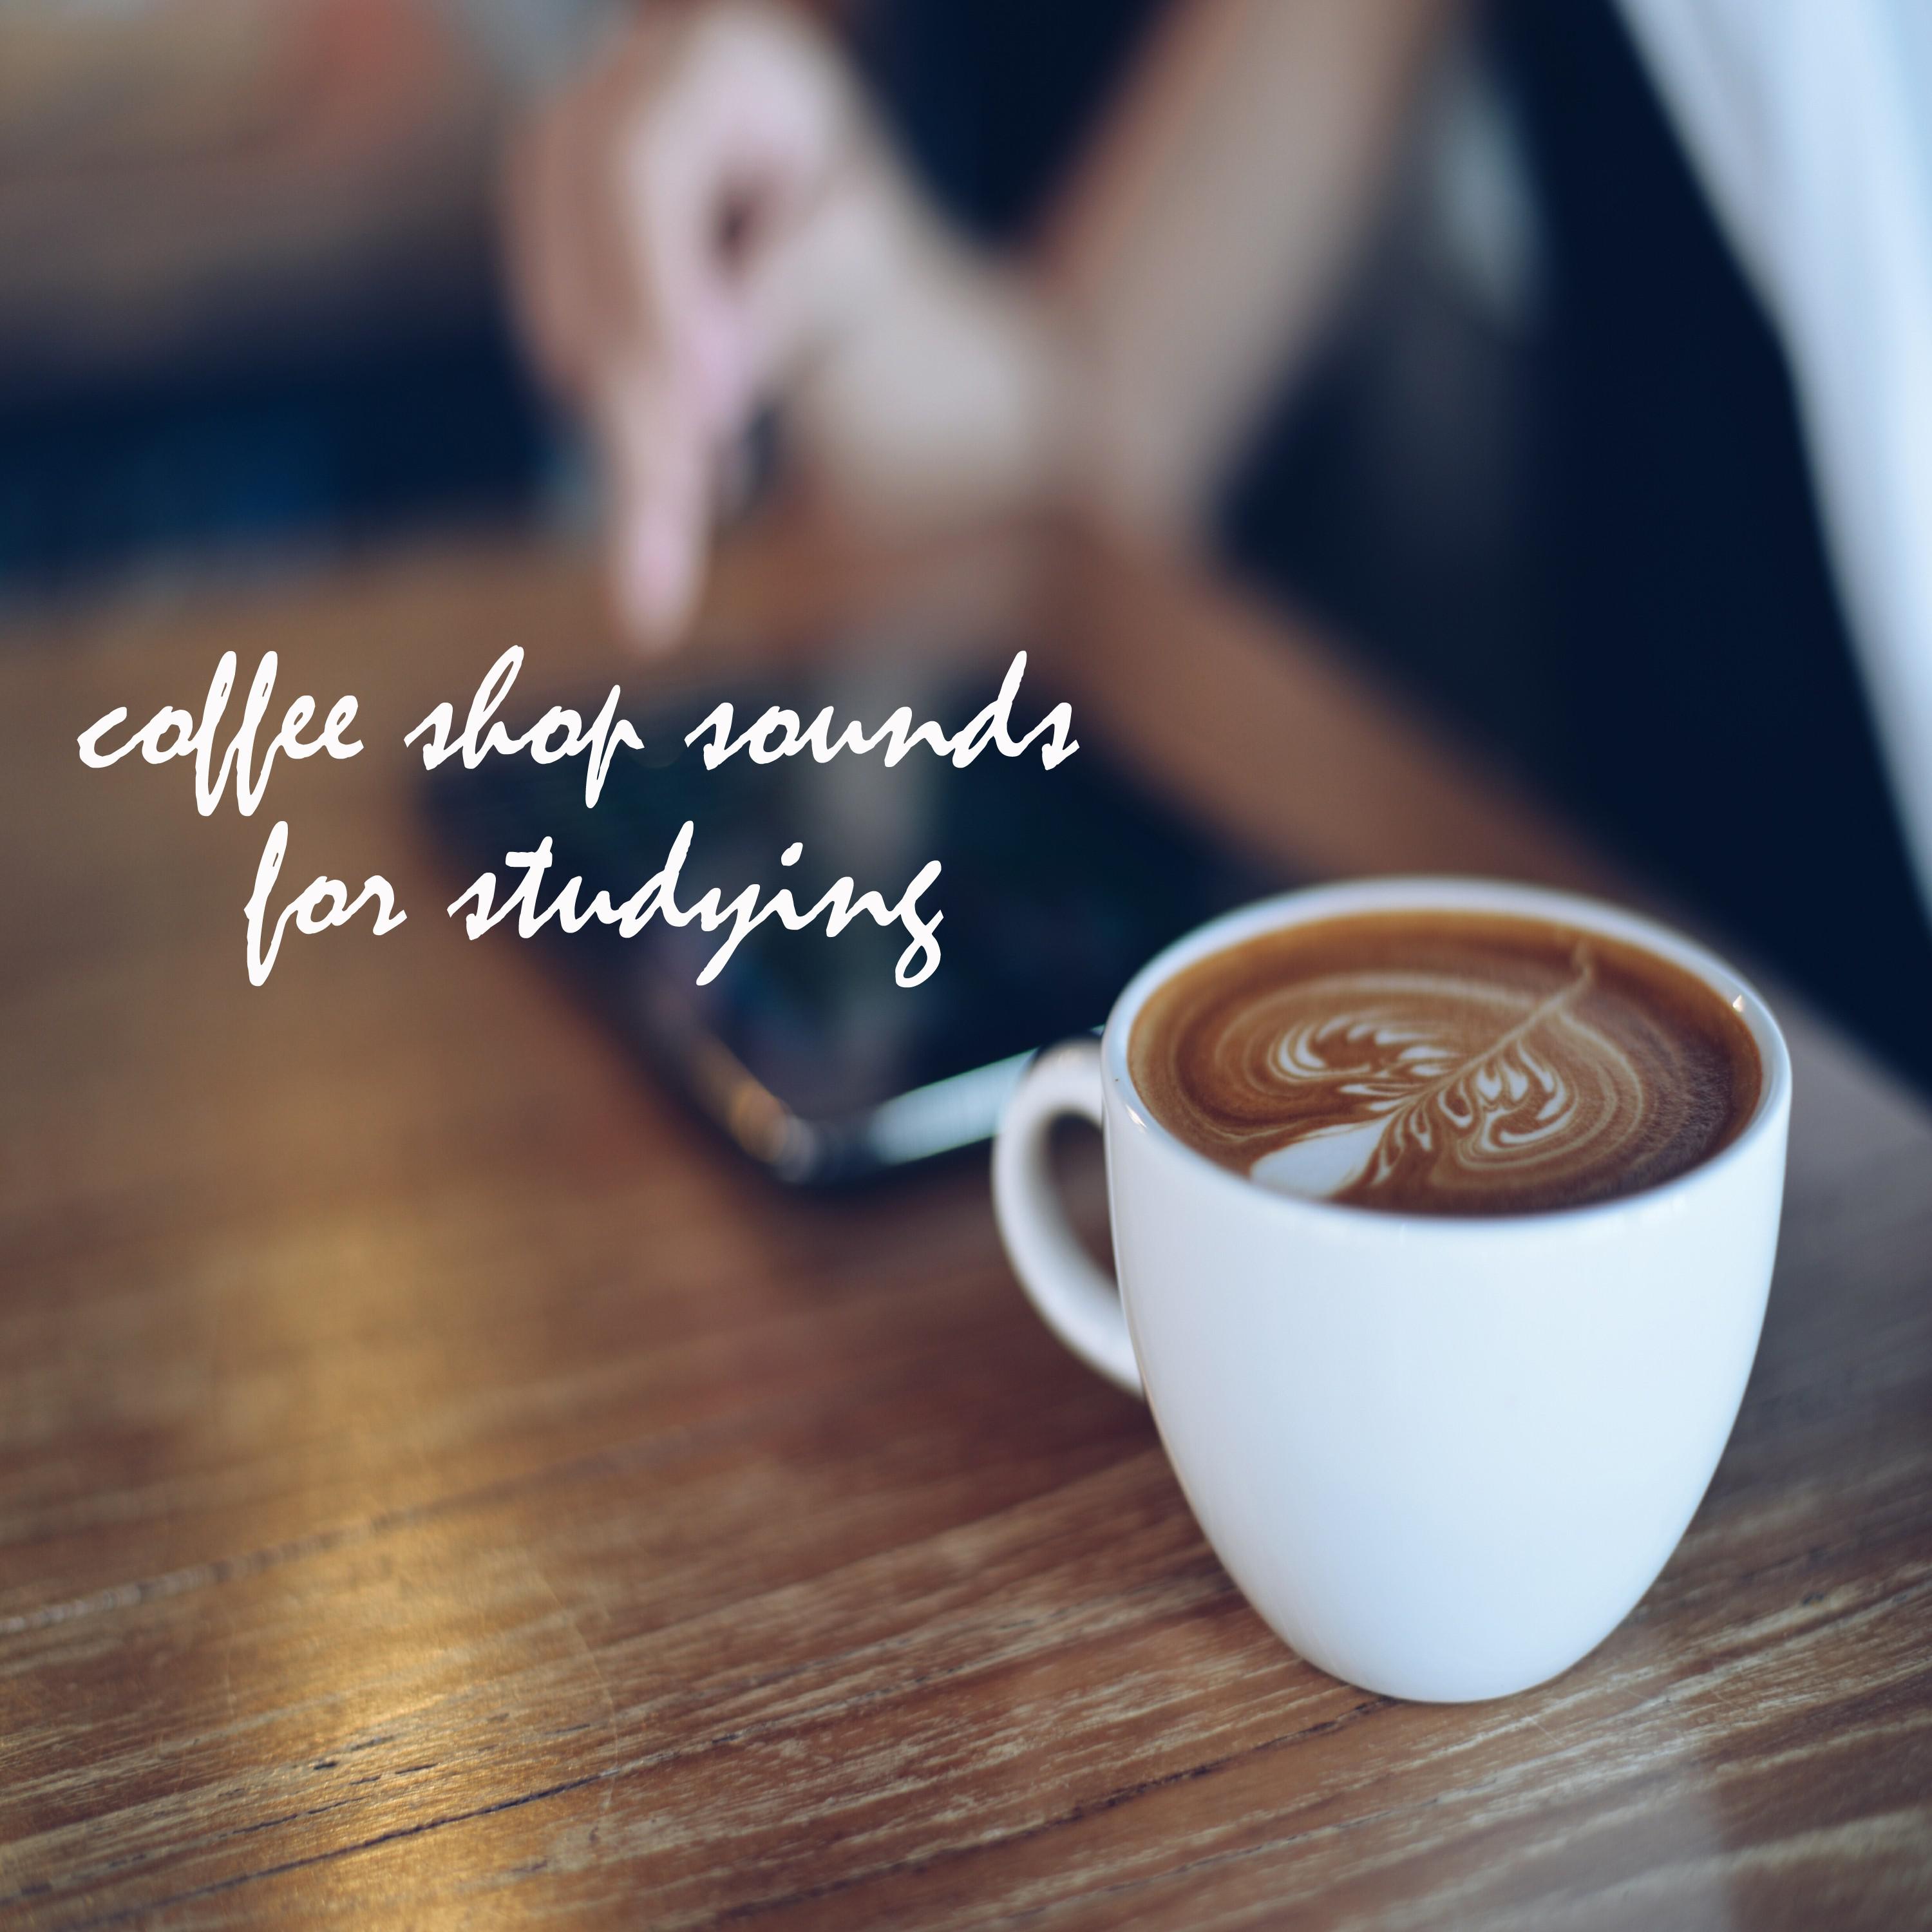 Coffee Shop Sounds for Studying and Working, Pt. 37